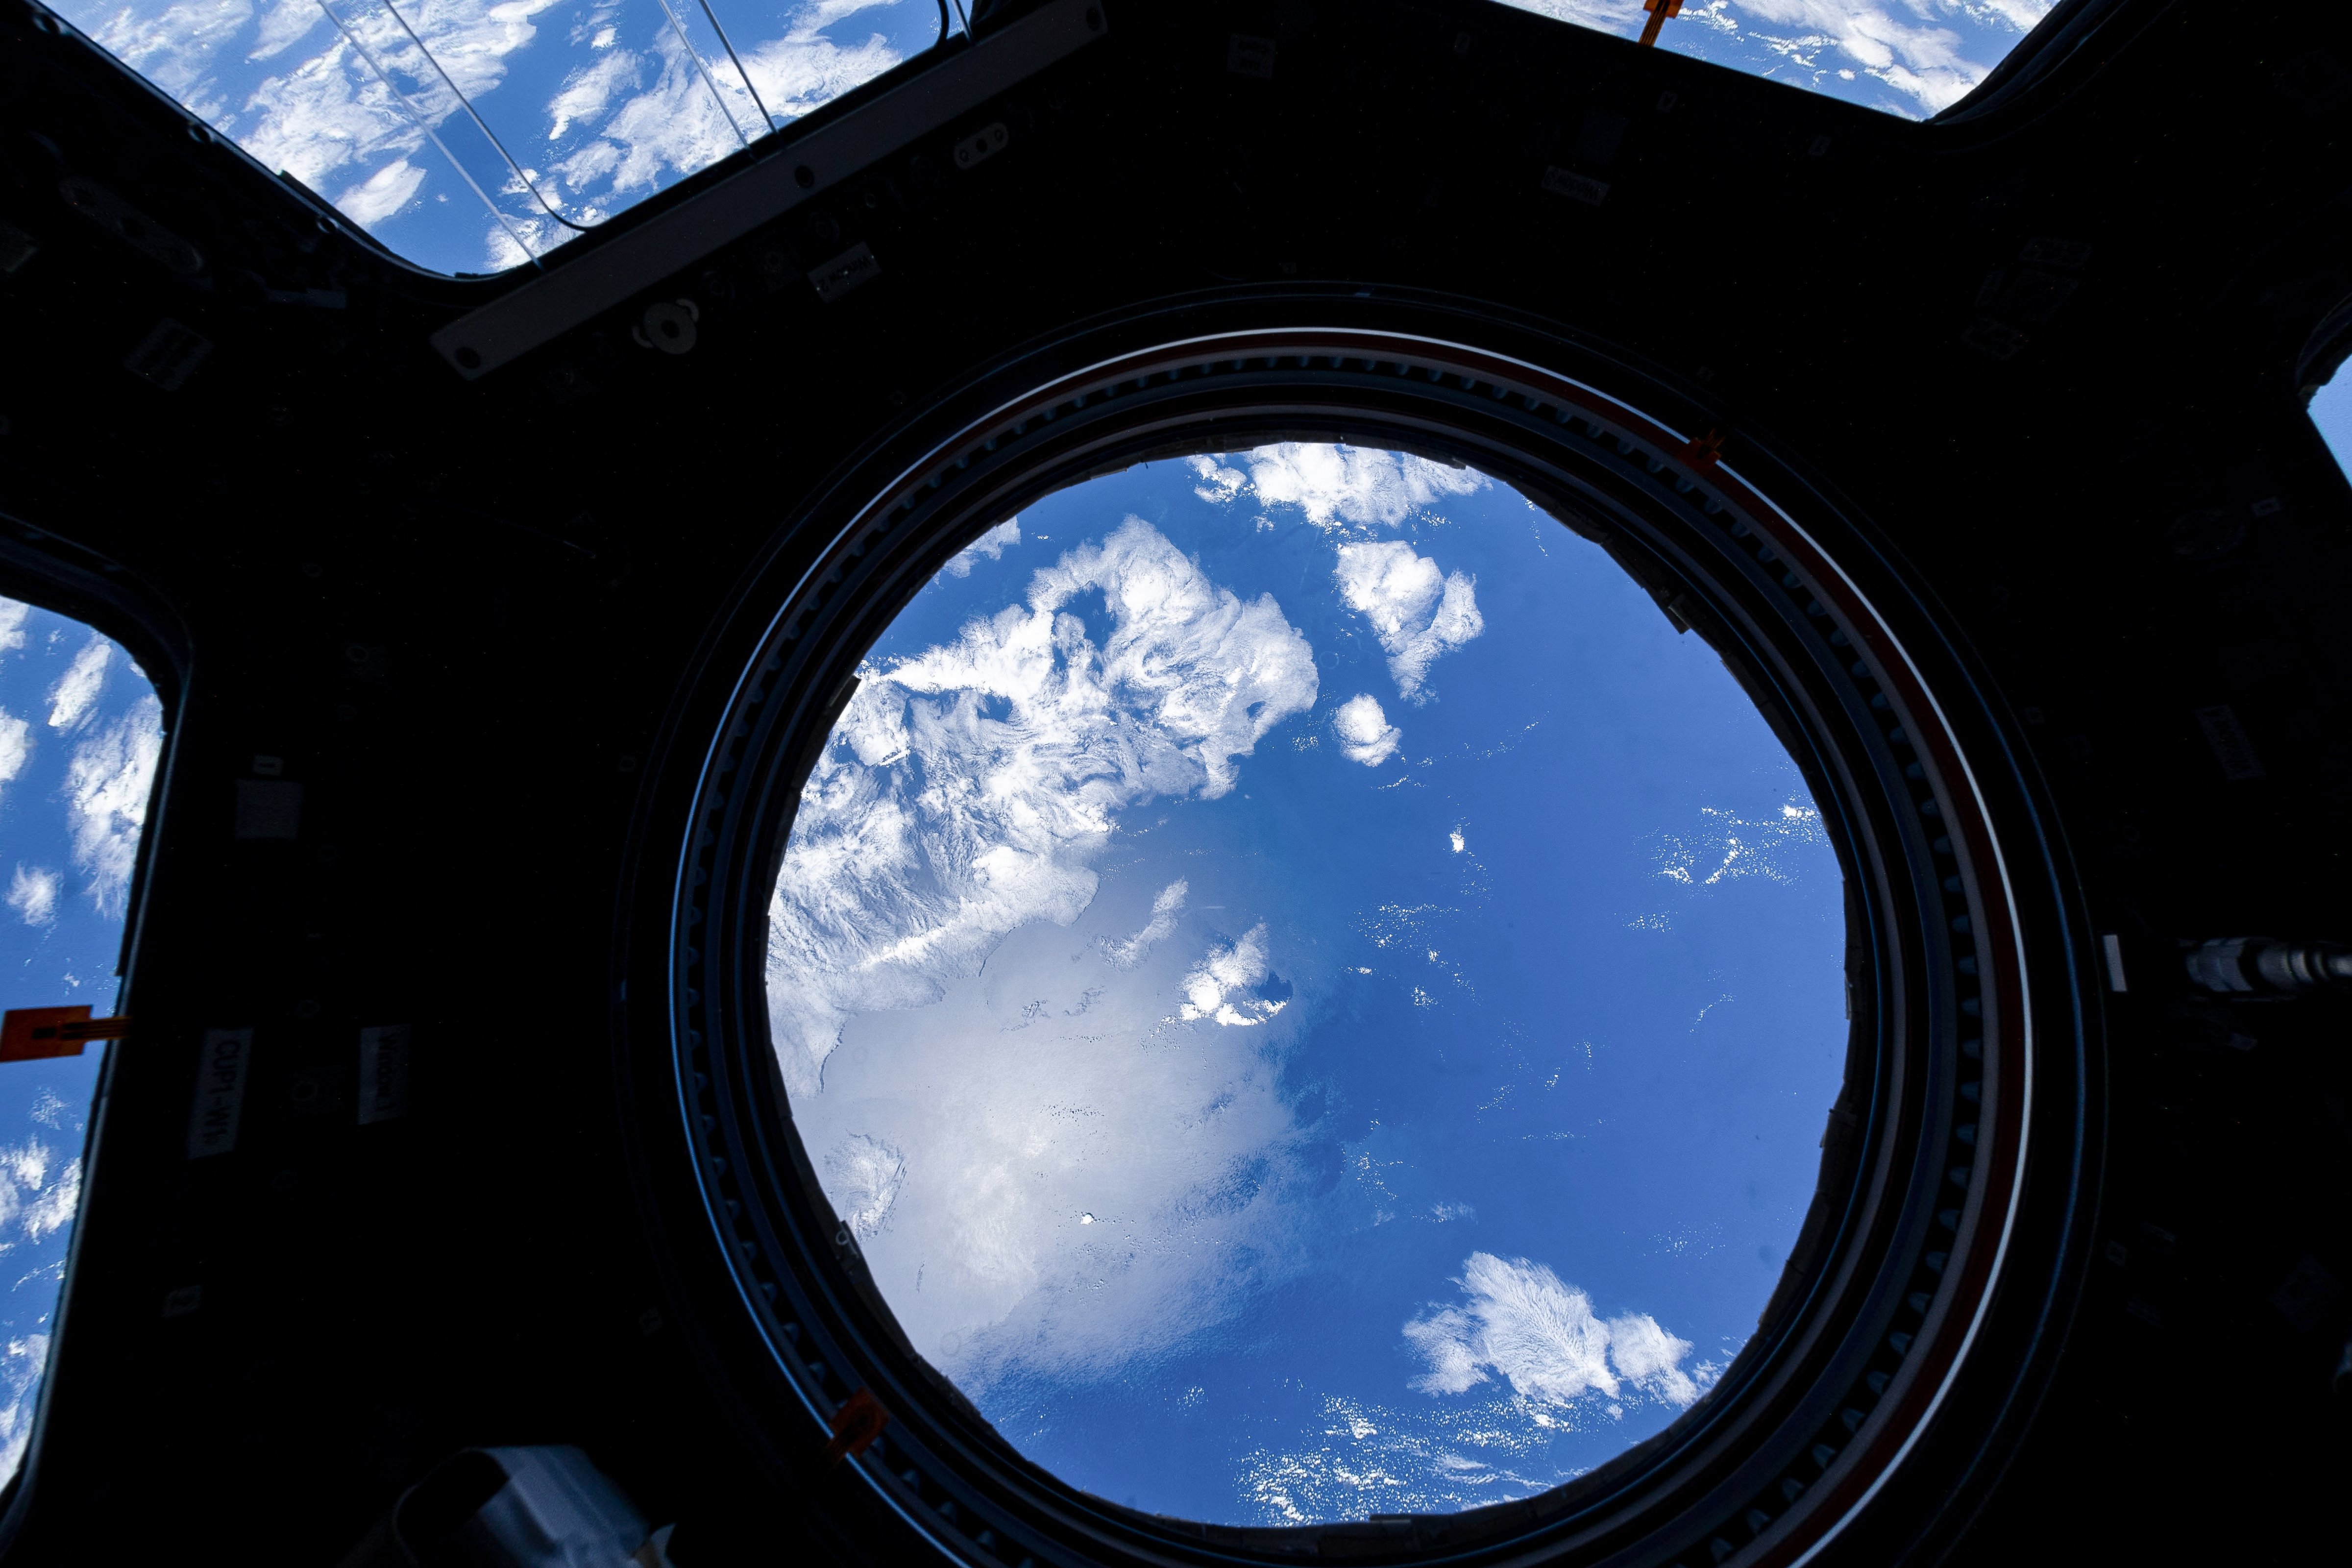 The Earth as seen from the cupola of the International Space Station (Getty Images/Roberto Machado Noa)